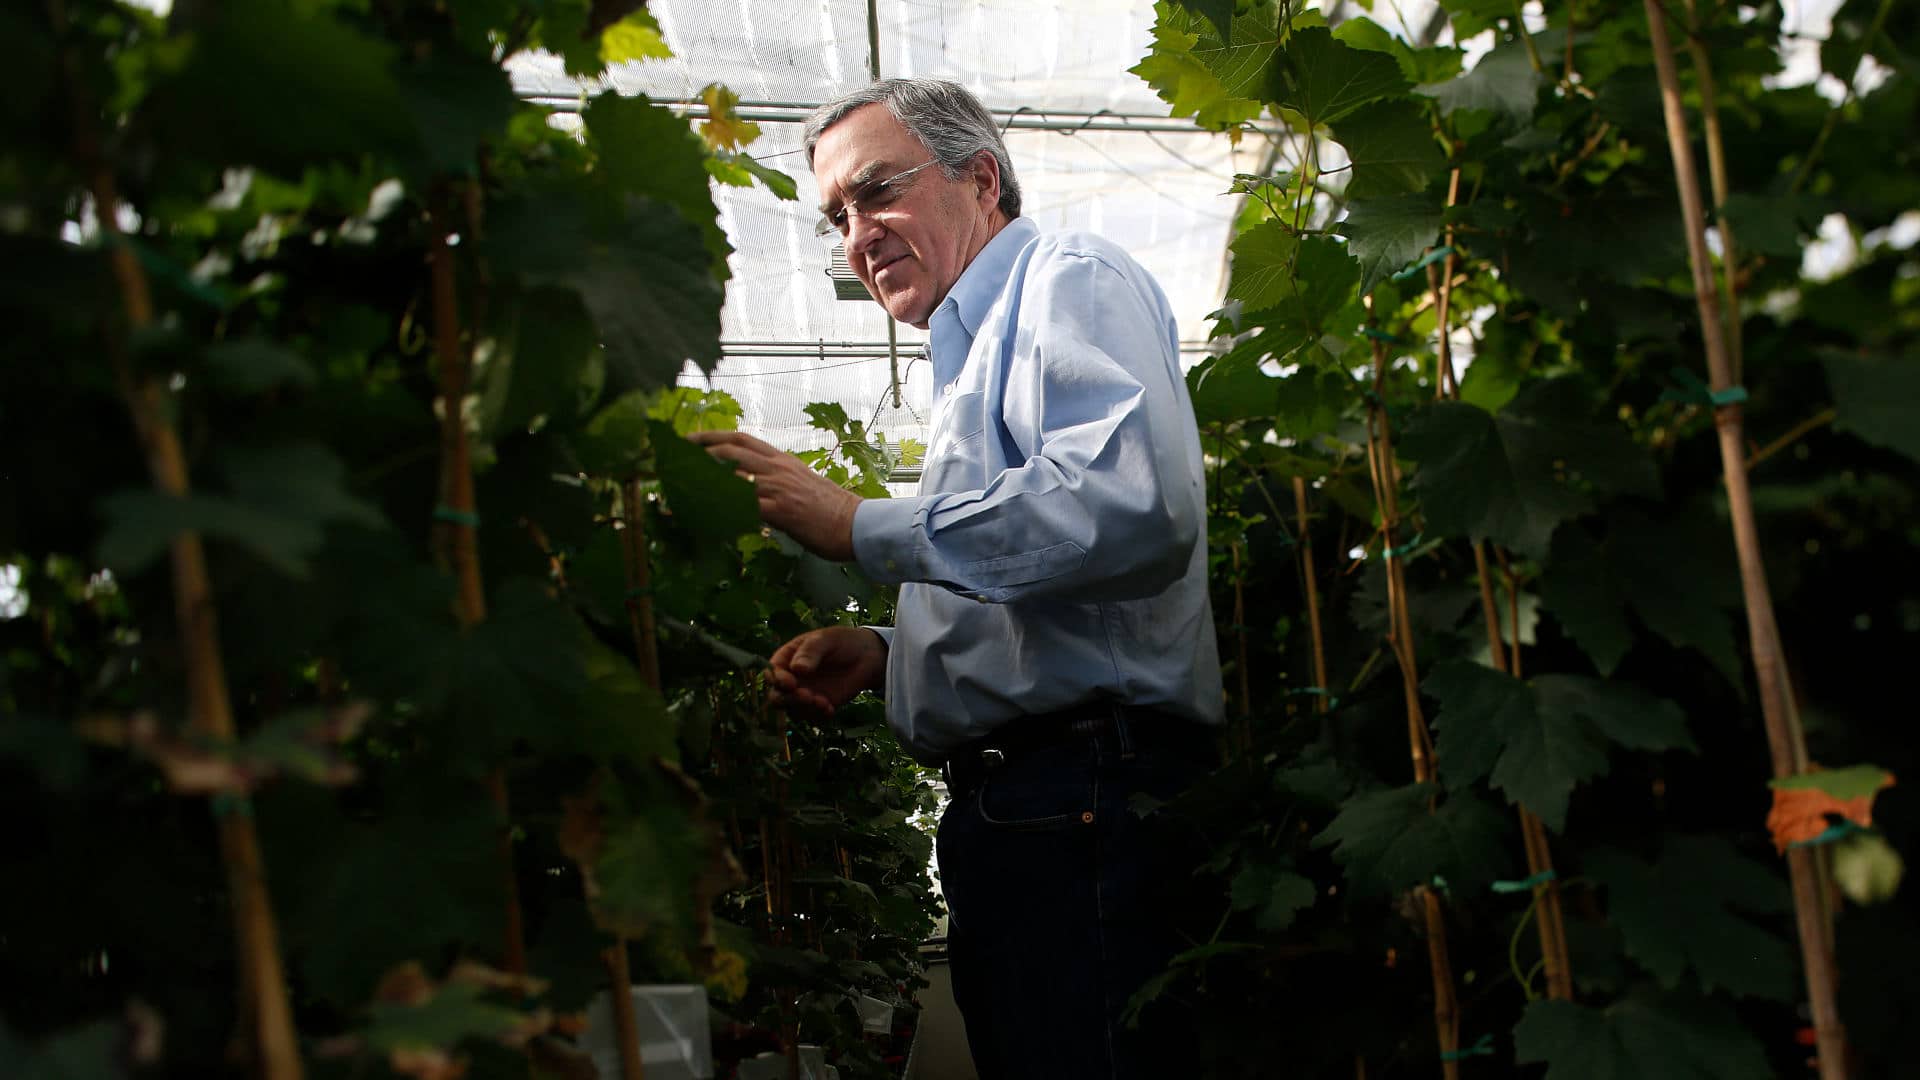 Plant geneticist and viticulturist Andrew Walker studies grapevines with Pierce's disease.